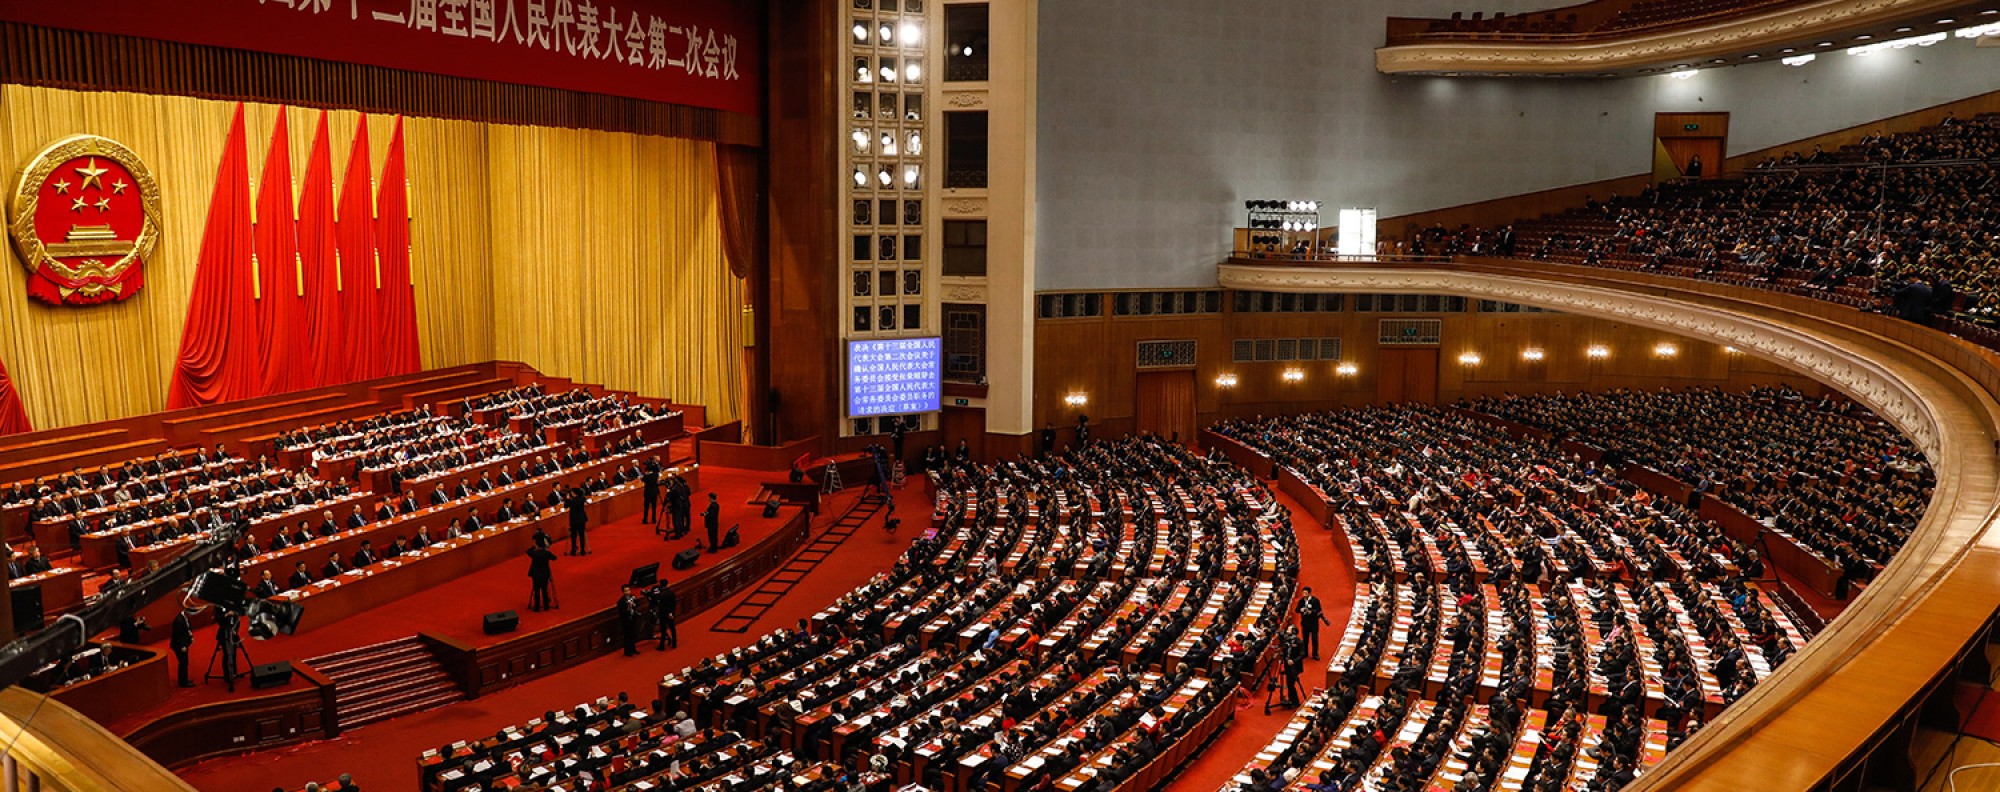 The Great Hall of the People in Beijing. Photo: EPA-EFE